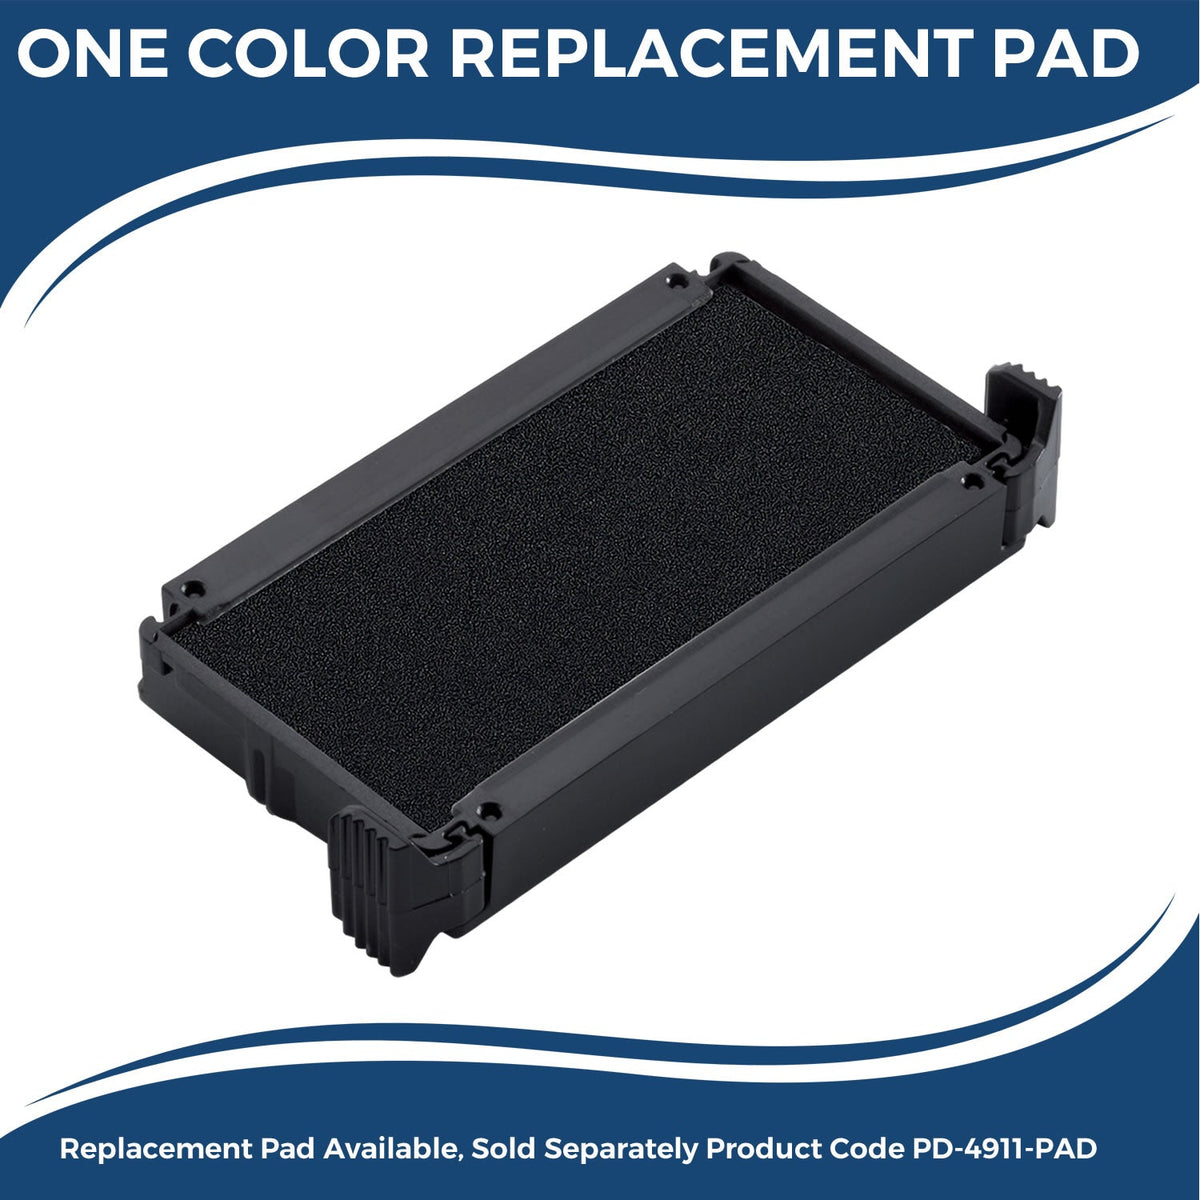 Replacement Pad for Self Inking Plaintiffs Exhibit Stamp